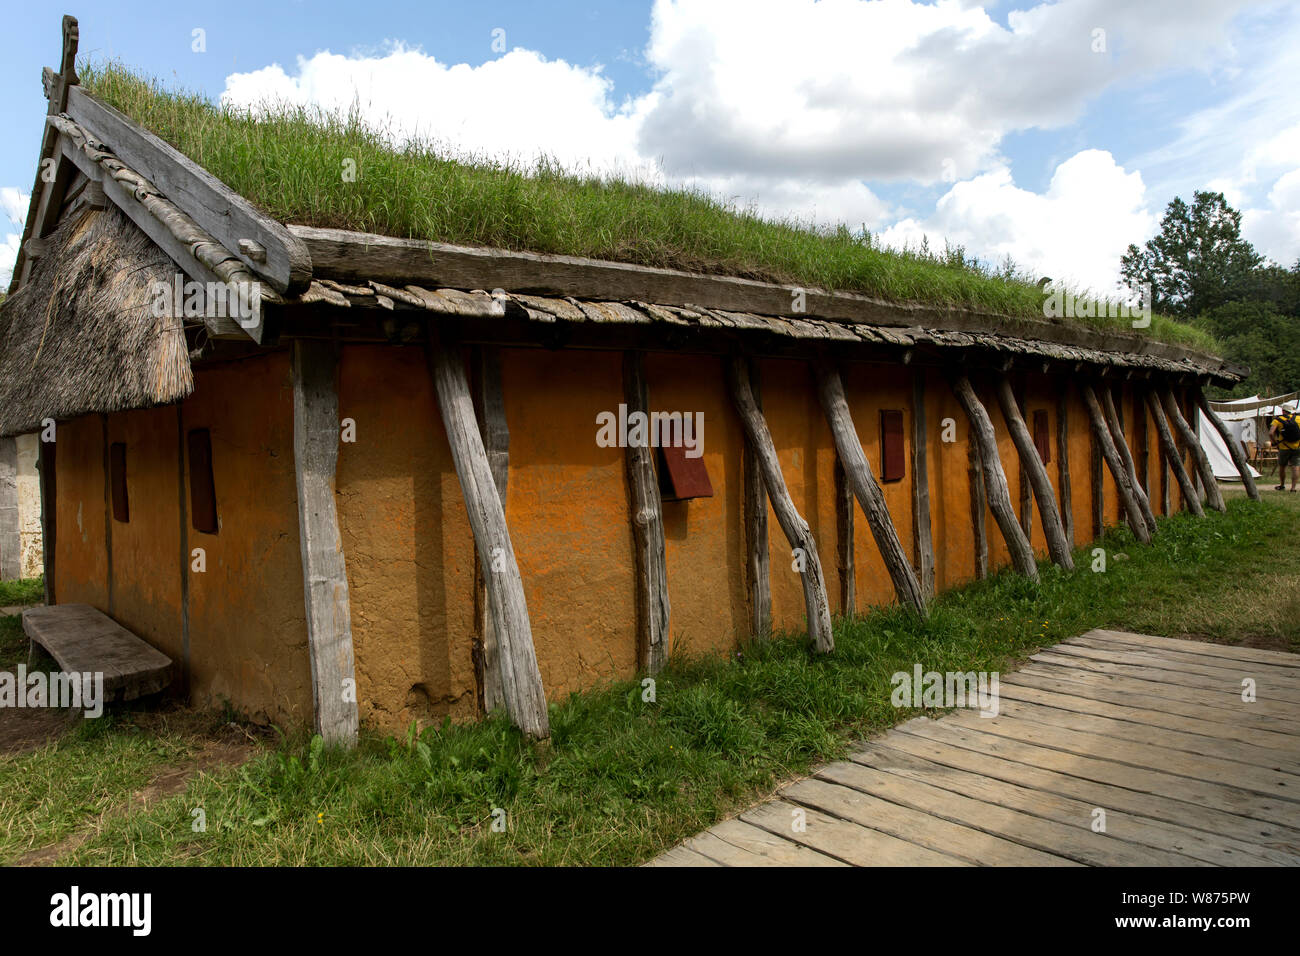 Reconstructed Viking house from around year 980 at Ribe Viking Centre in Lostrupholm near Ribe, Denmark.  The house was found in Ribe during an archaeological excavation and reconstructed at the nearby Viking Centre. Stock Photo